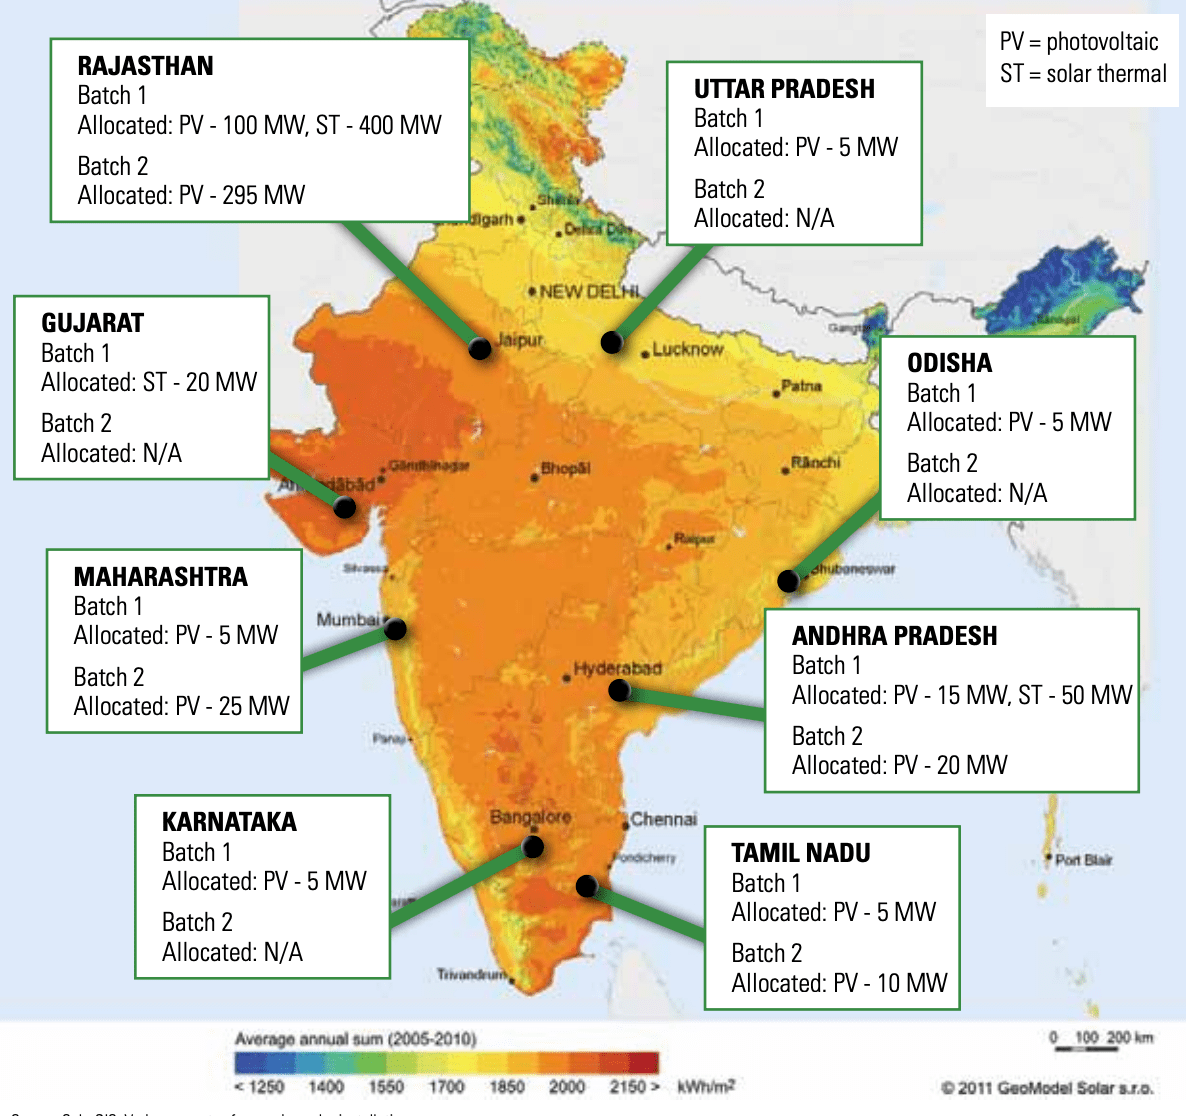 Rajasthan and Gujarat, which are endowed with the highest irradiation, led phase 1 installations